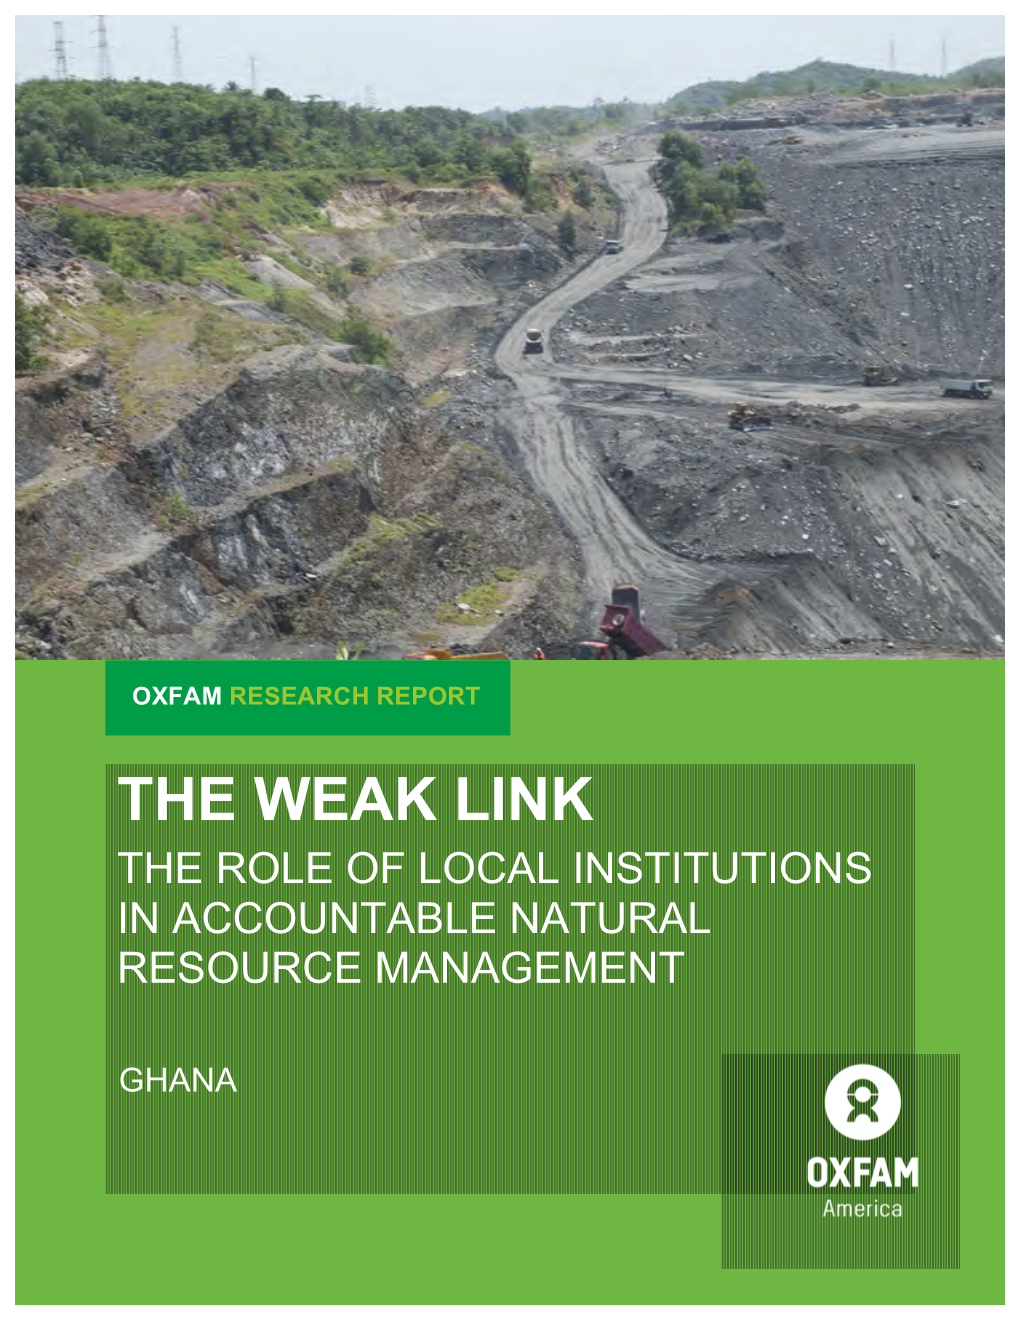 The Weak Link: the Role of Local Institutions in Accountable Natural